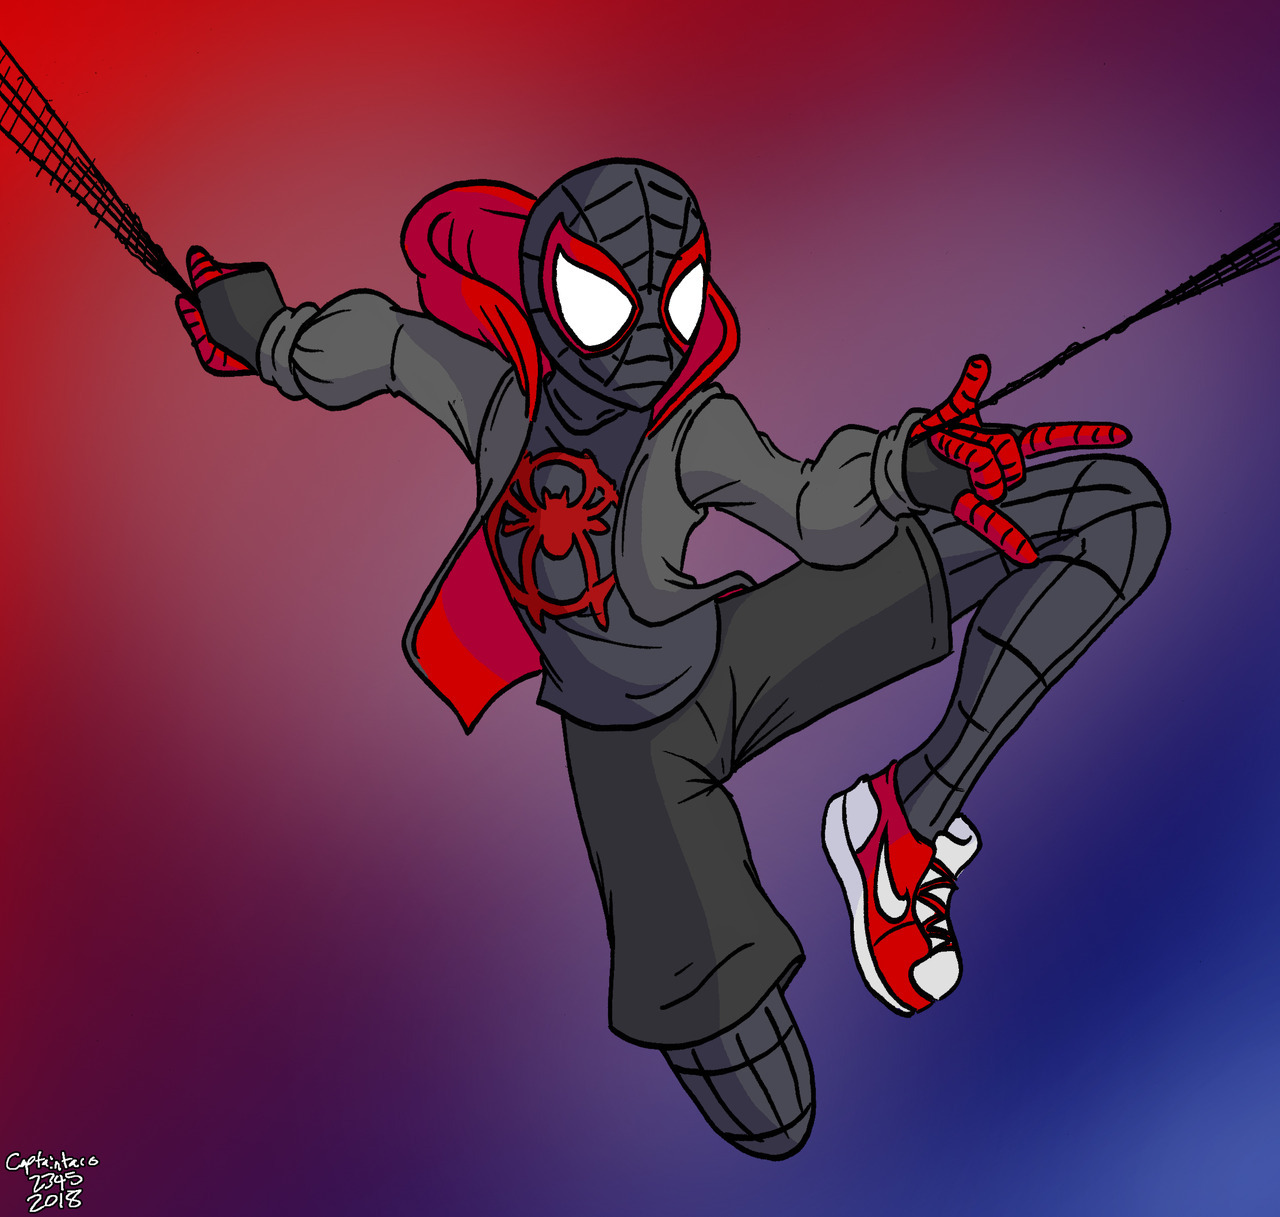 The new Into the Spiderverse movie looks rad, so I drew Miles Morales Spiderman as